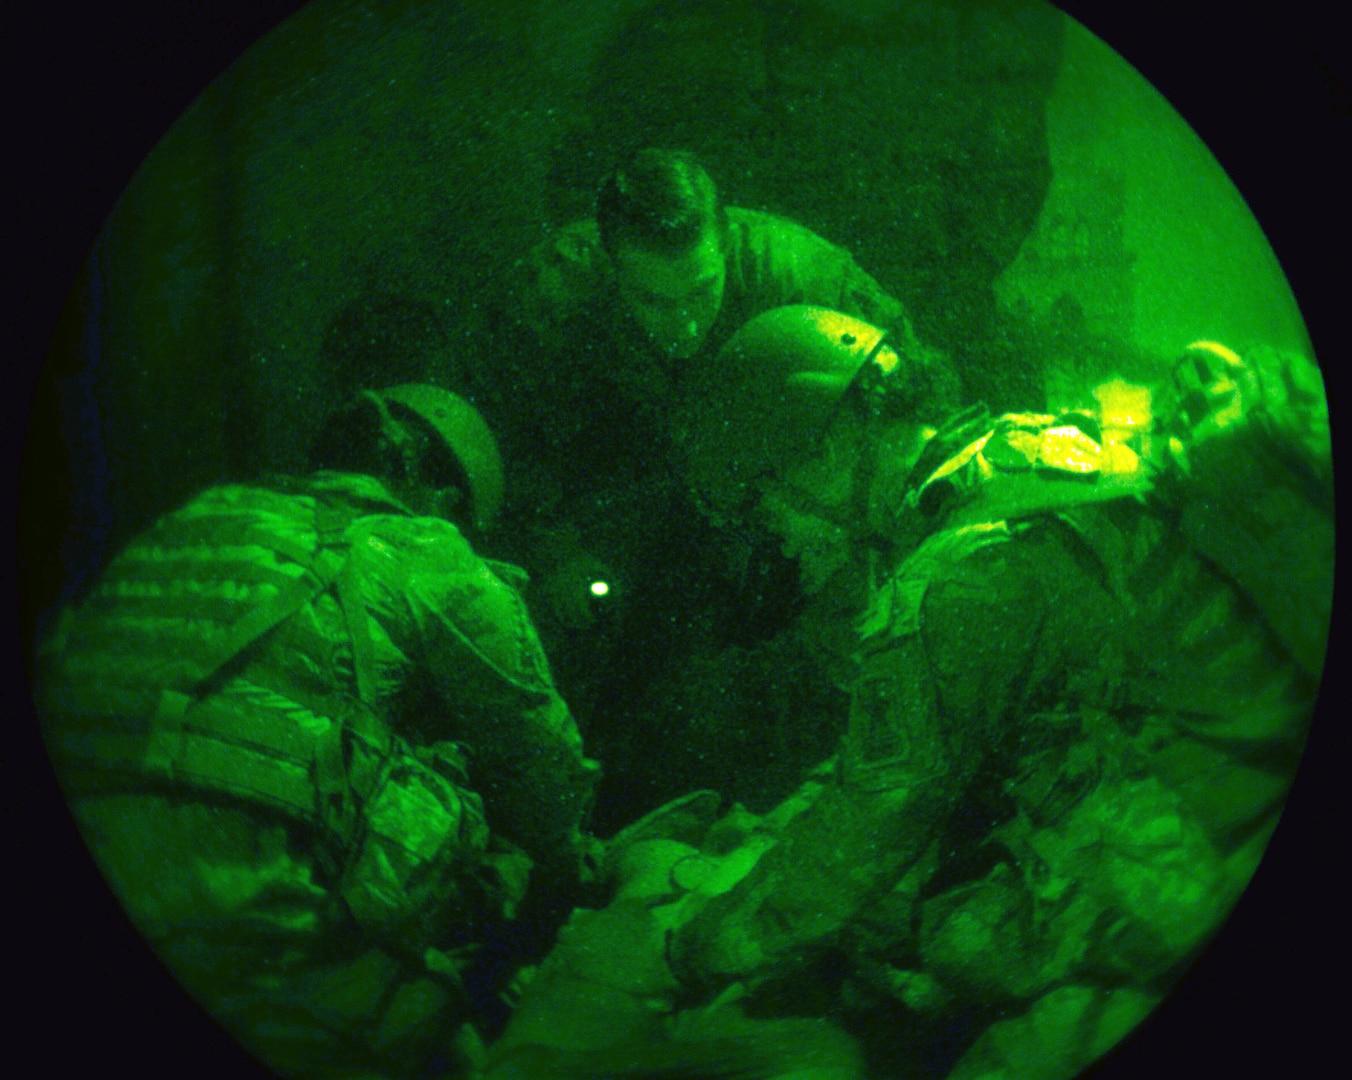 Combat medic trainees experience first-ever nighttime combat simulation